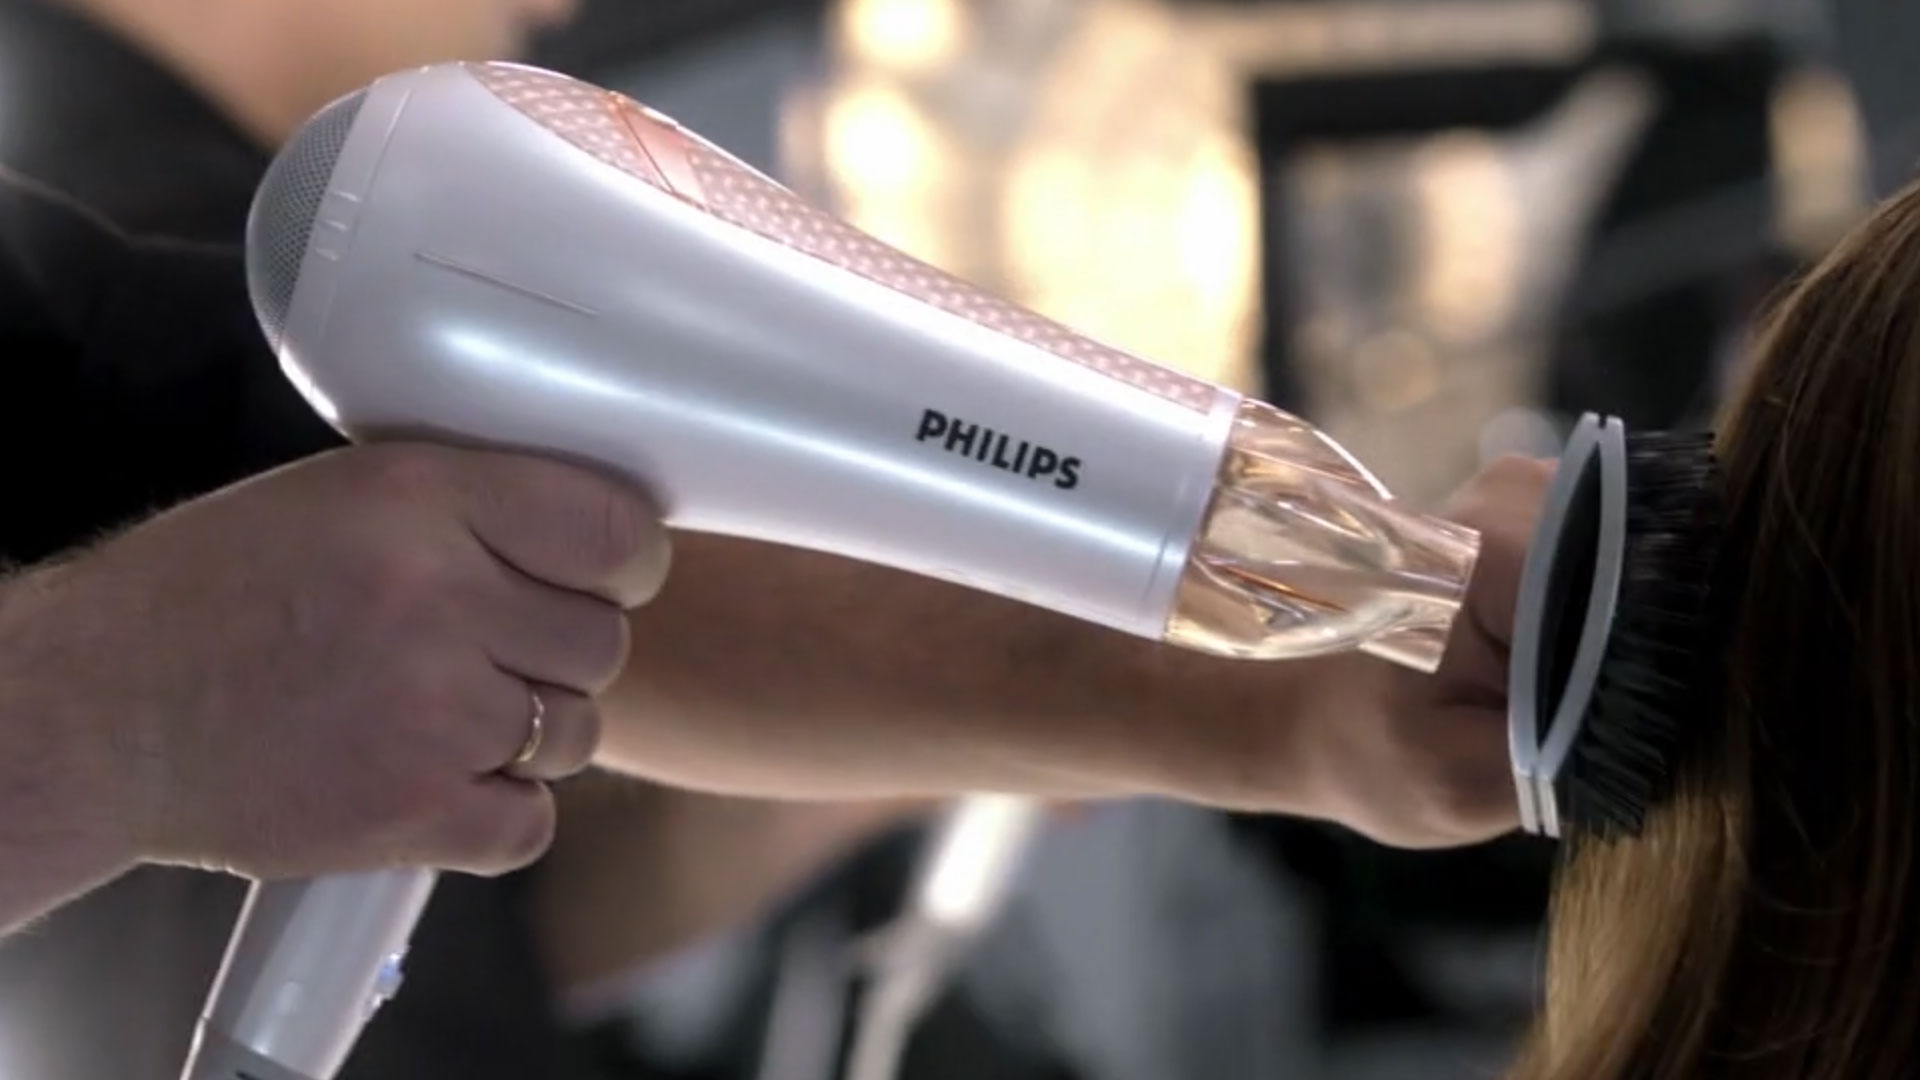 Philips-hair-hairdryer-commercial-for-Russia